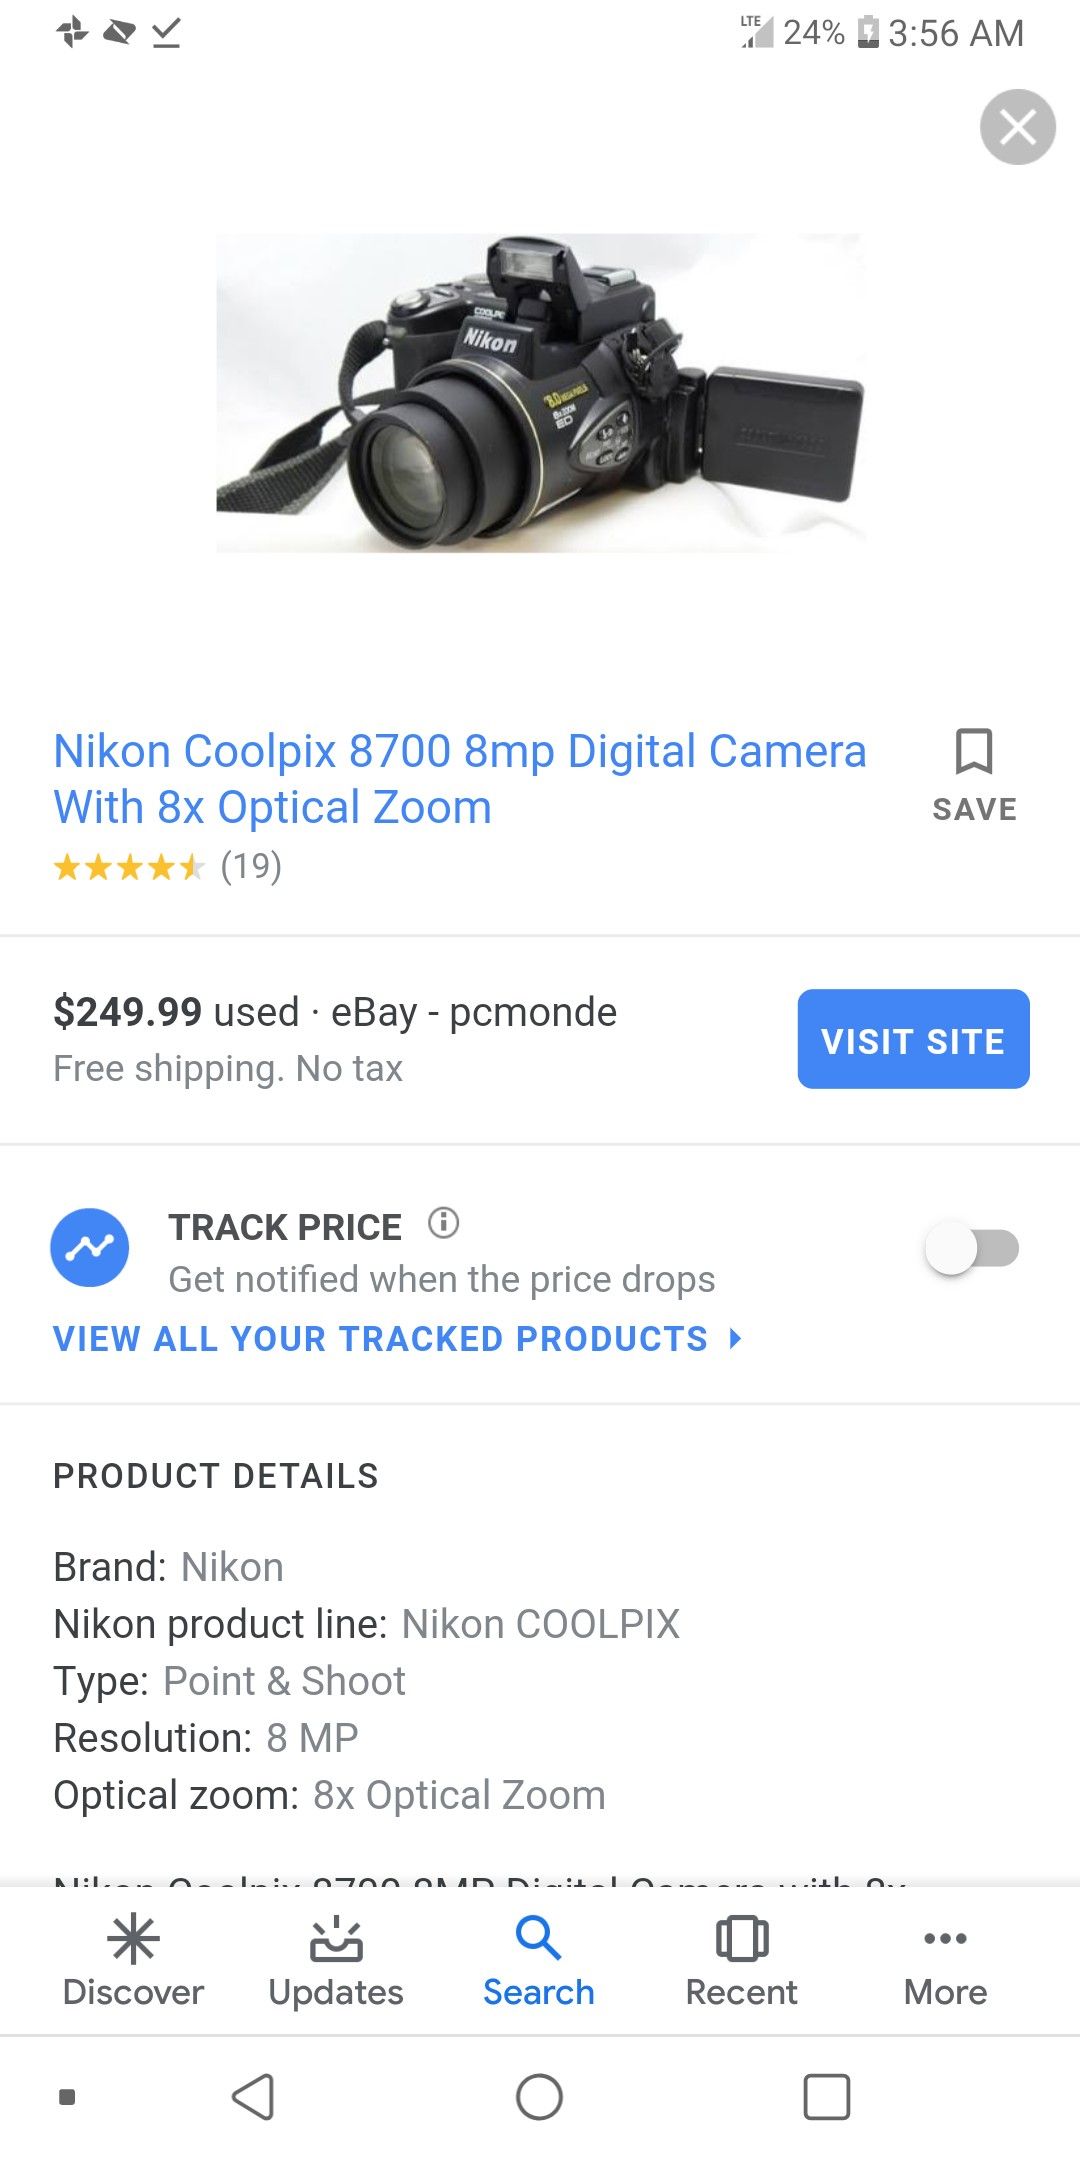 Nikon E8700 digital camera works very good over $1500.00 in value for everything shown.